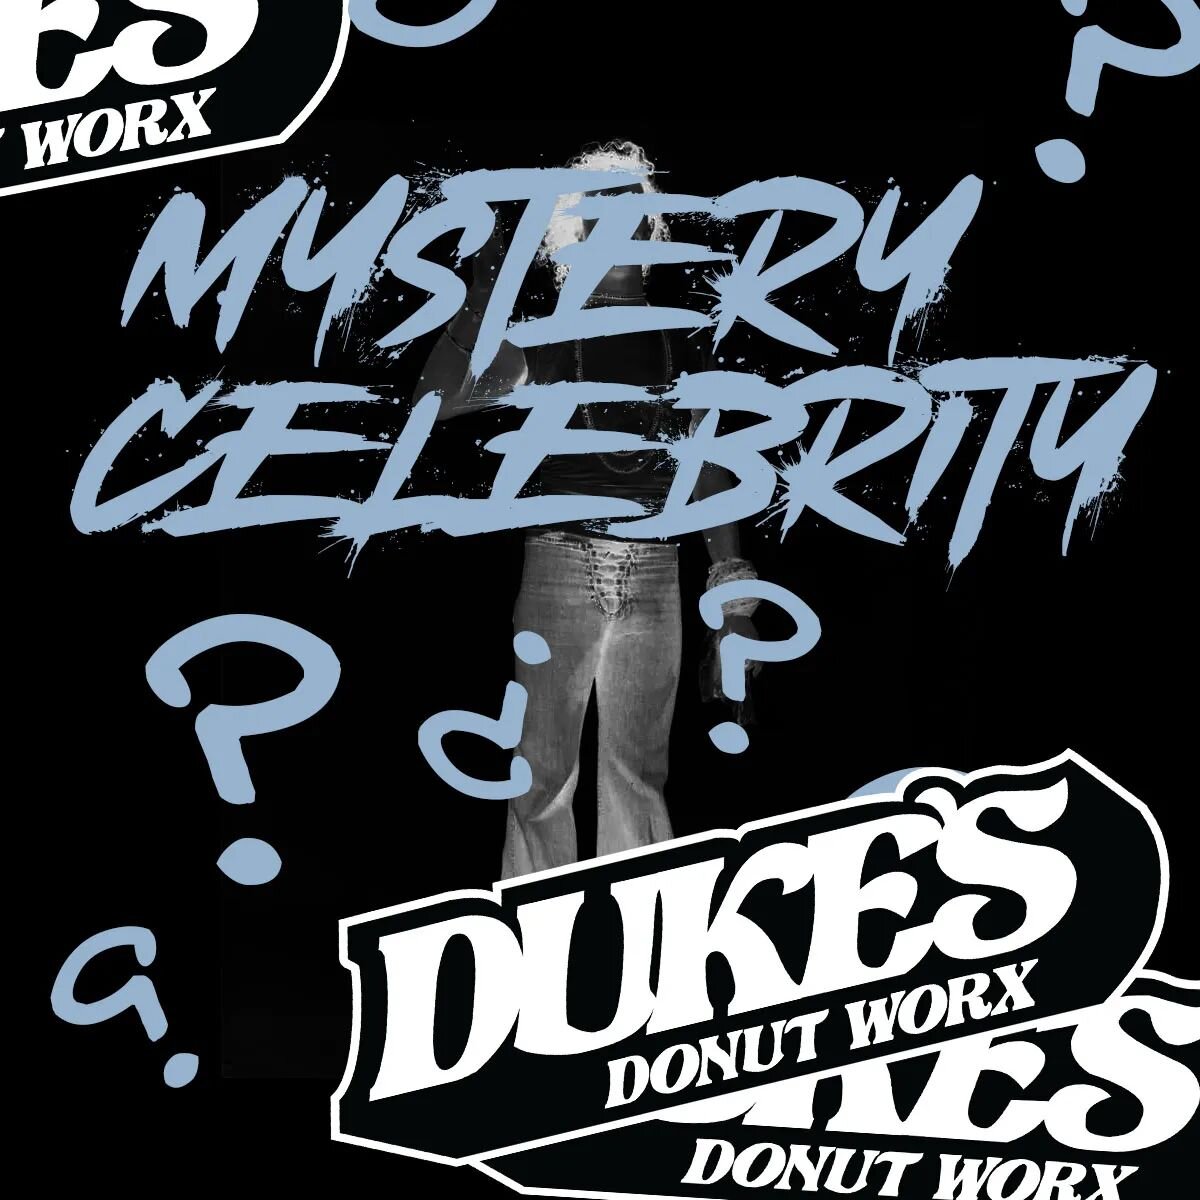 Let's hear some guesses. We got our fav mystery celeb to record a vid sharing the joys of Duke's. But WHO? 
Hints: Not Candice Bergman; alive (obv); from back in the day; did both TV and movies. More hints to come. Reveal on Sunday.